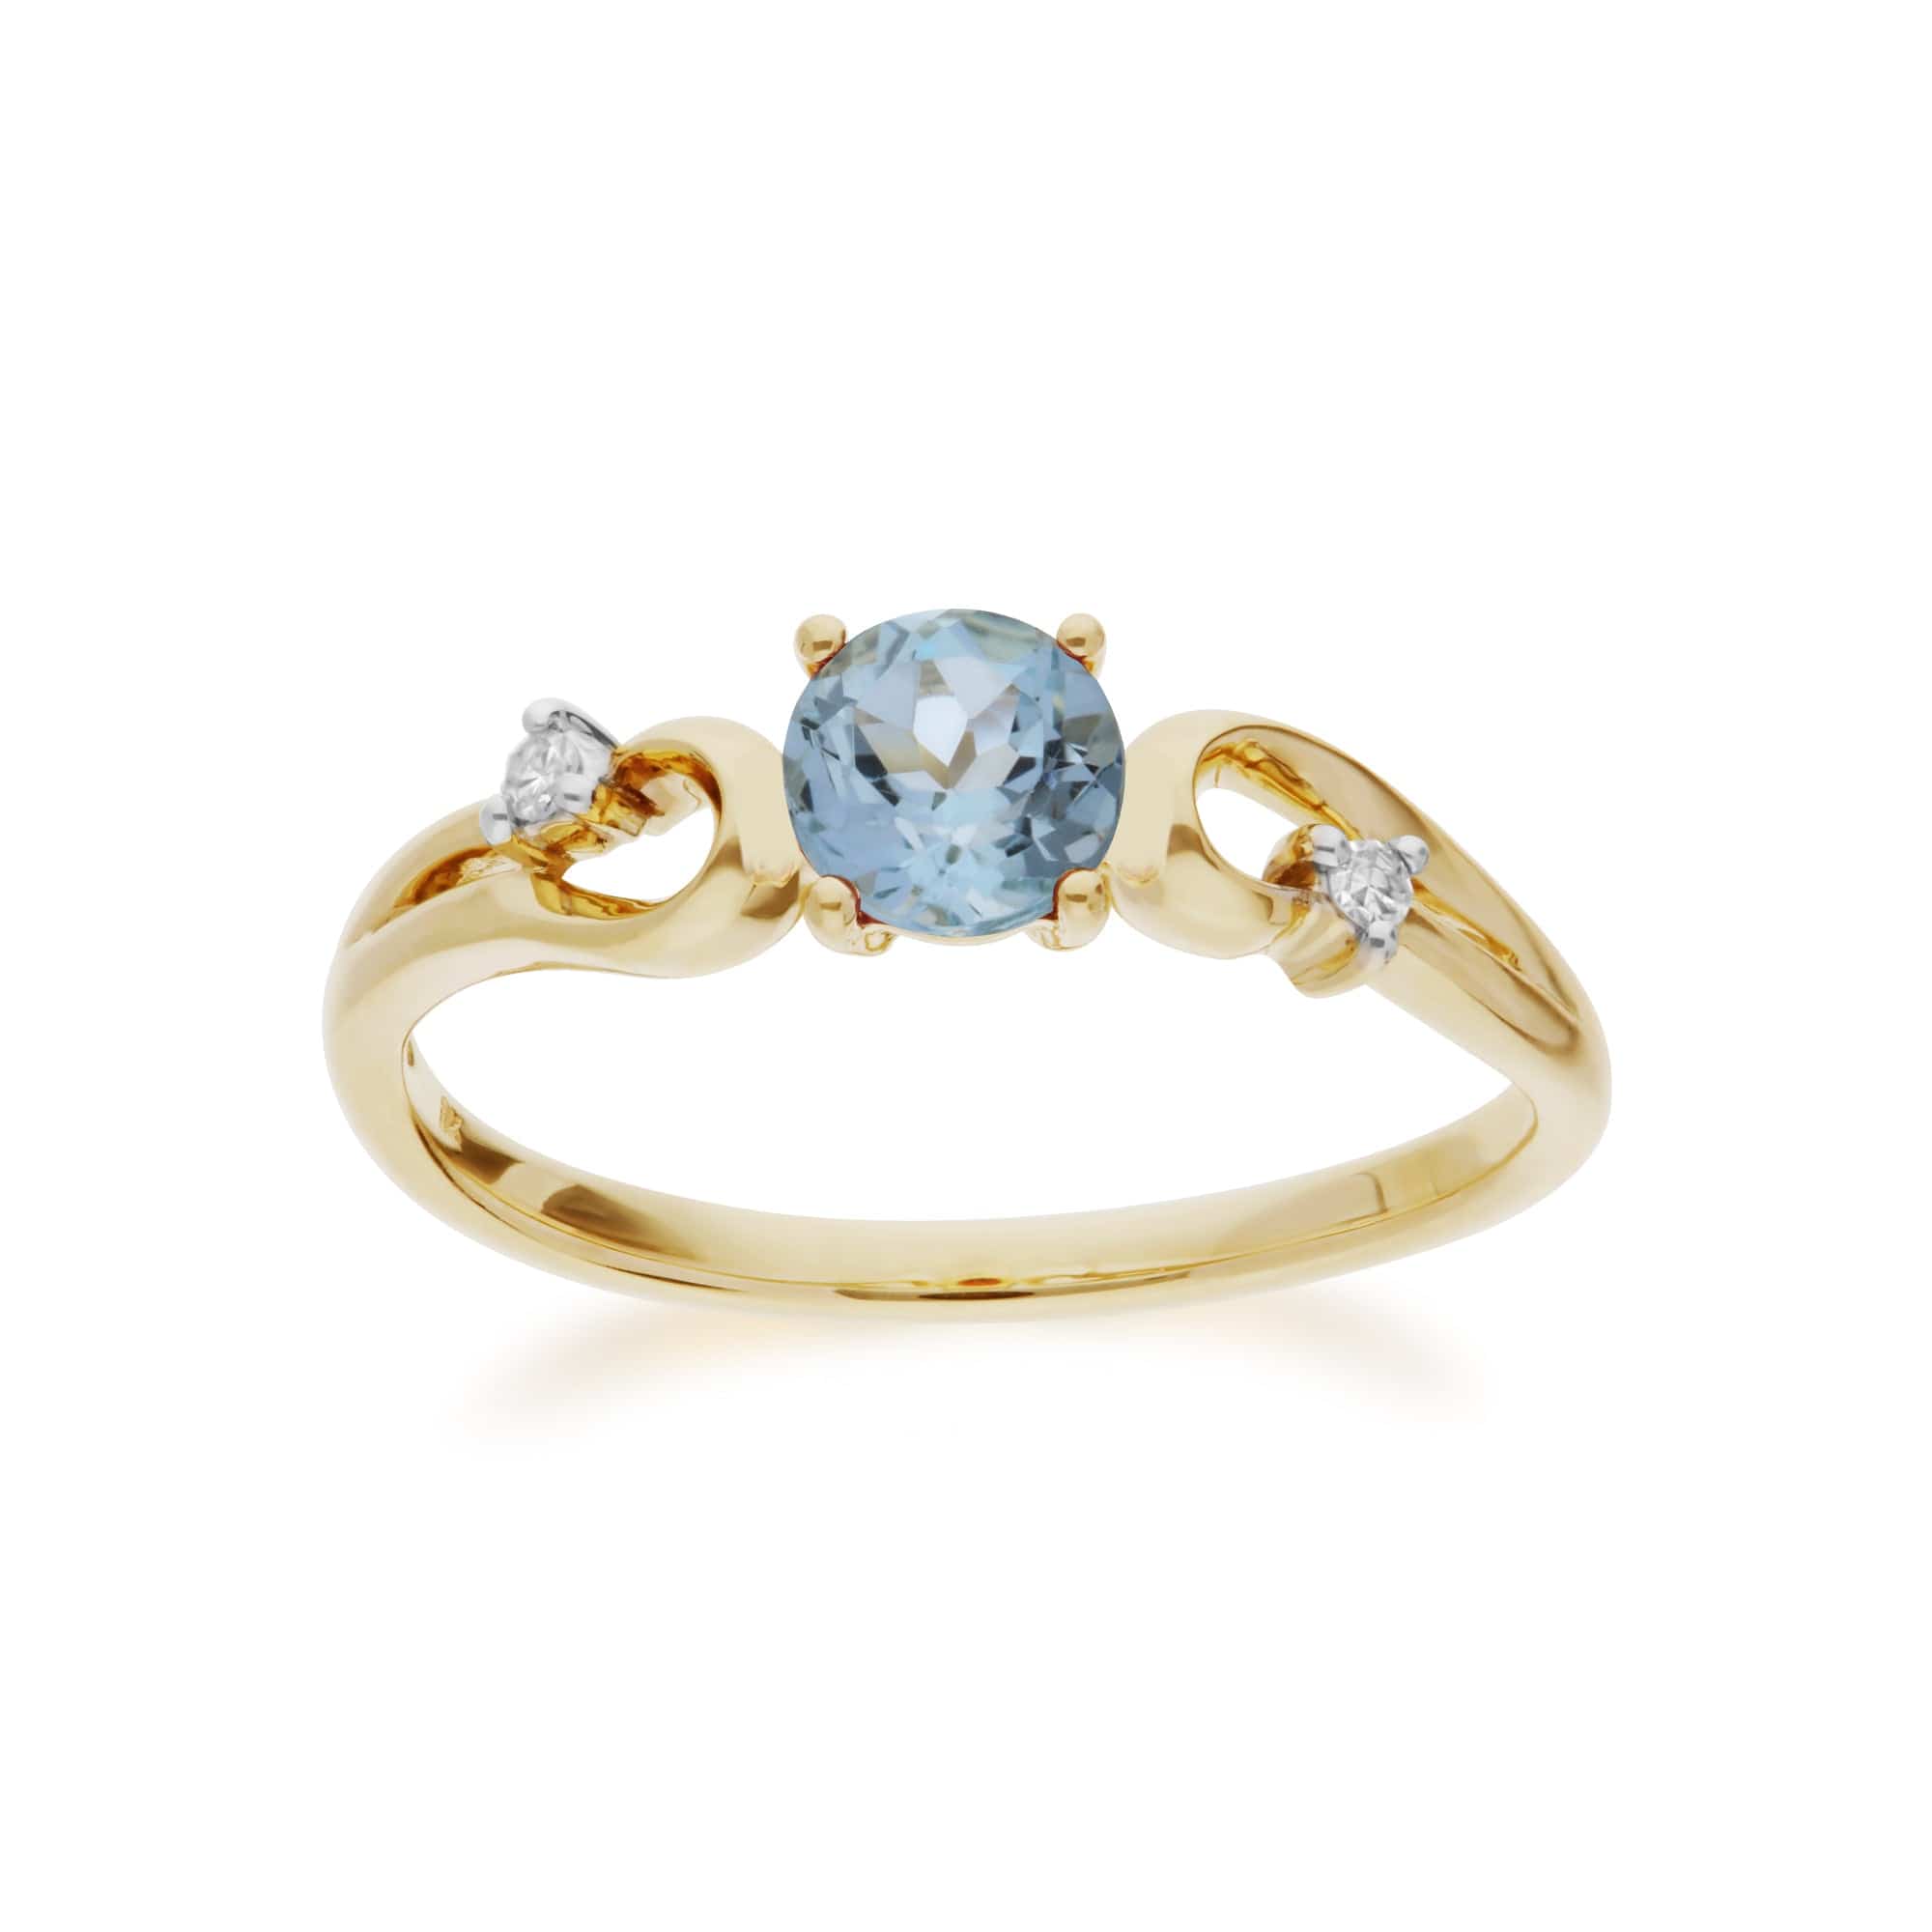 135R1742039 Classic Round Blue Topaz & Diamond Ring in 9ct Yellow Gold 1